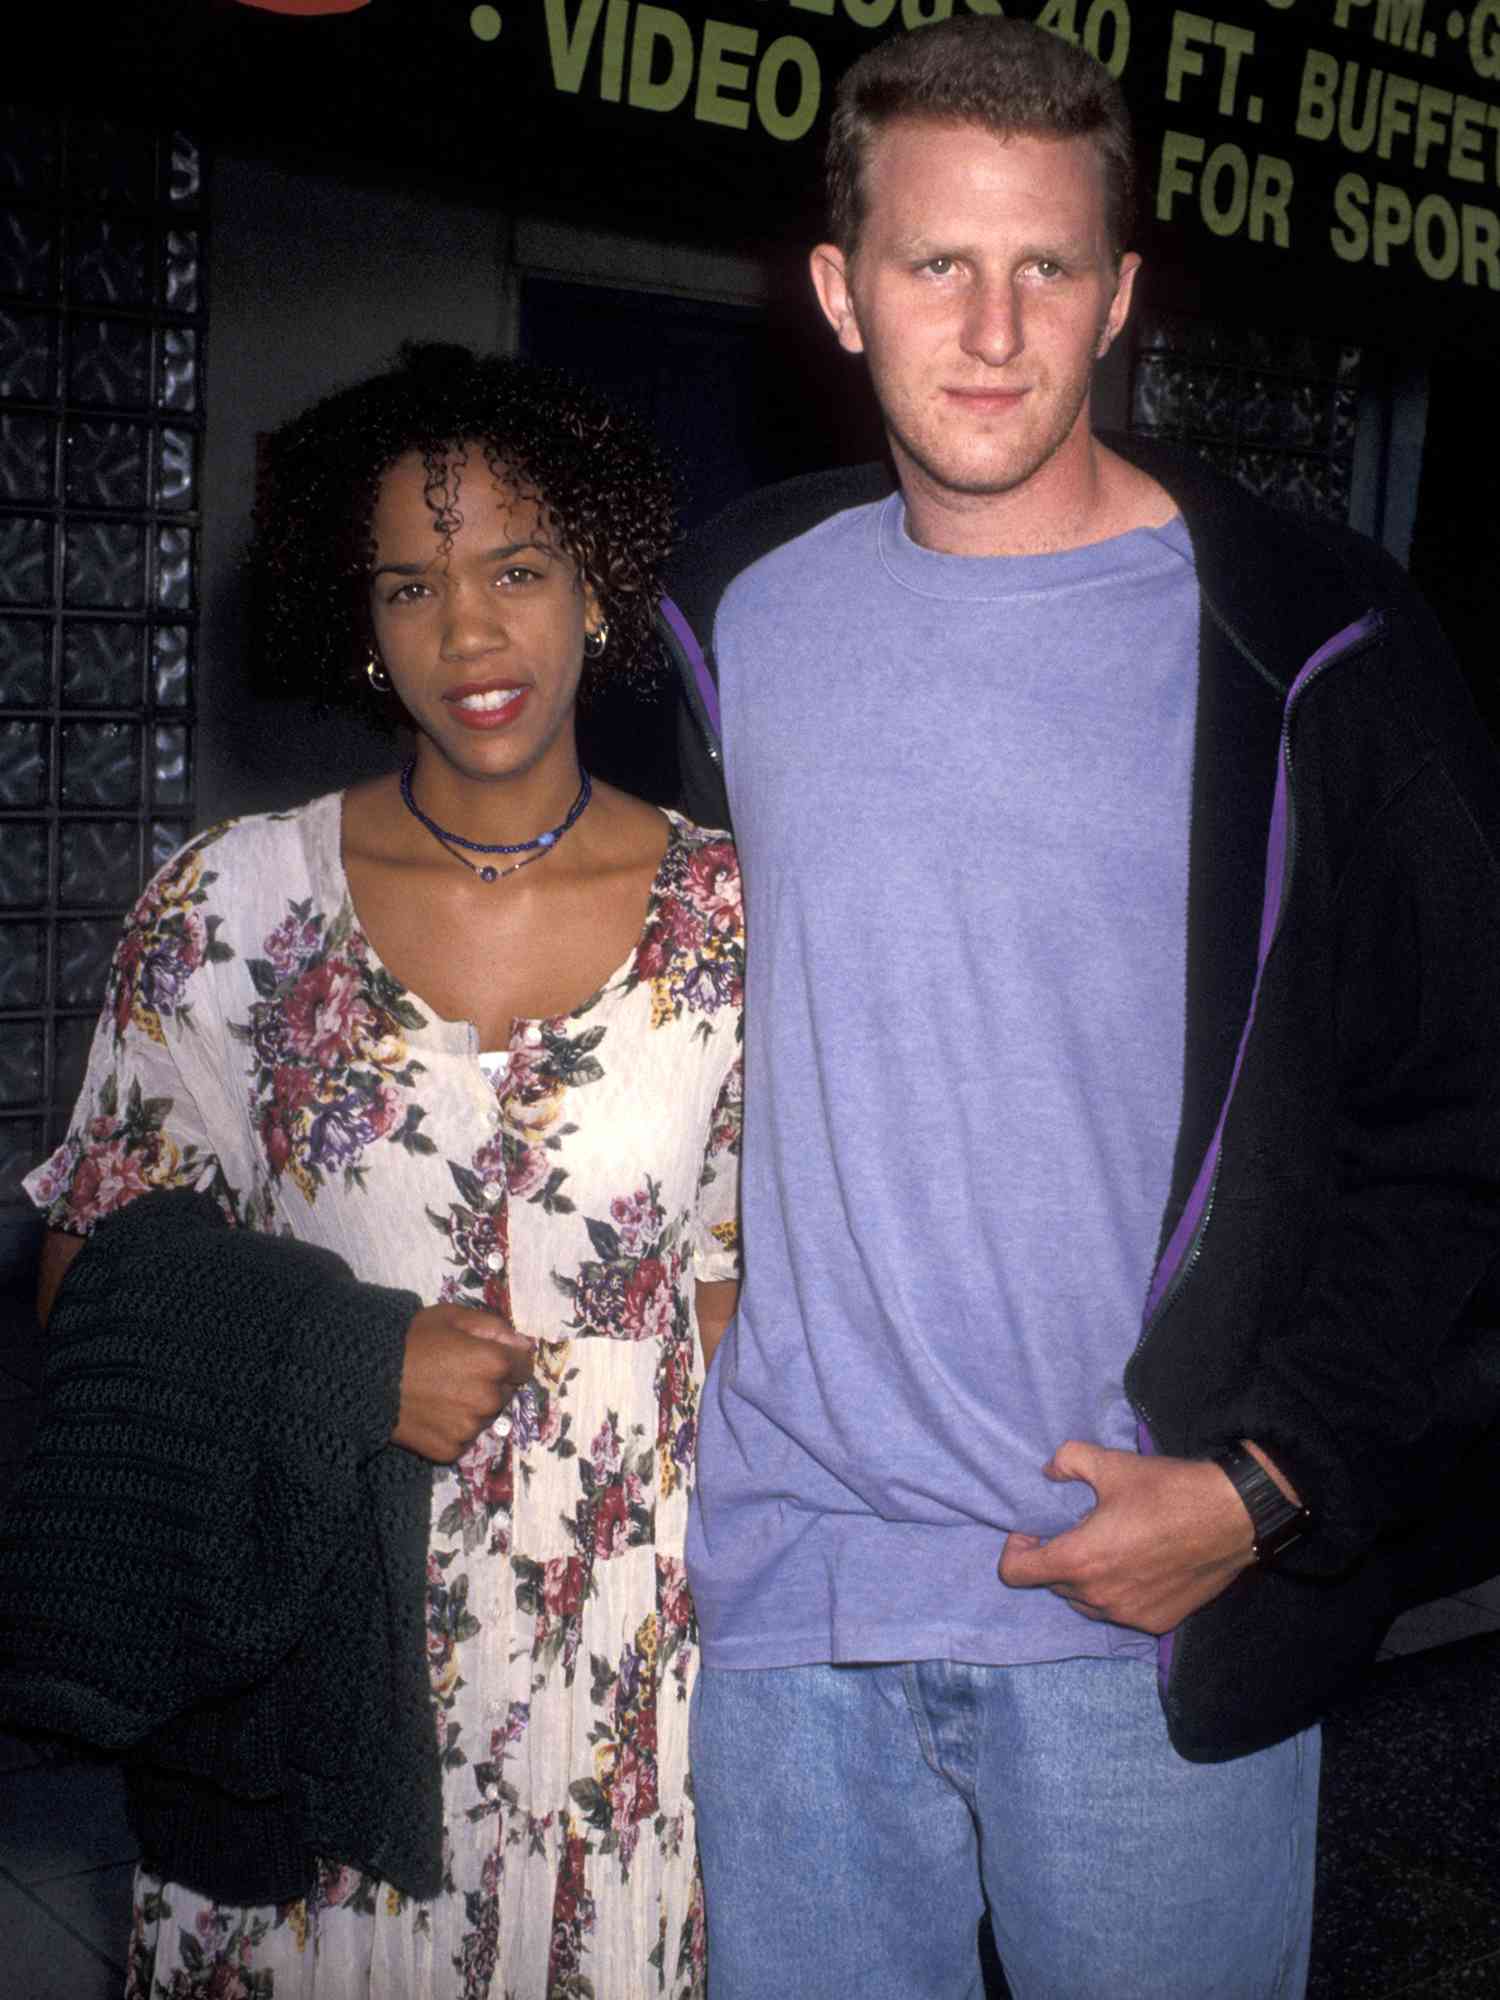 Kebe Dunn and Michael Rapaport during the "Amongst Friends" Hollywood Premiere.